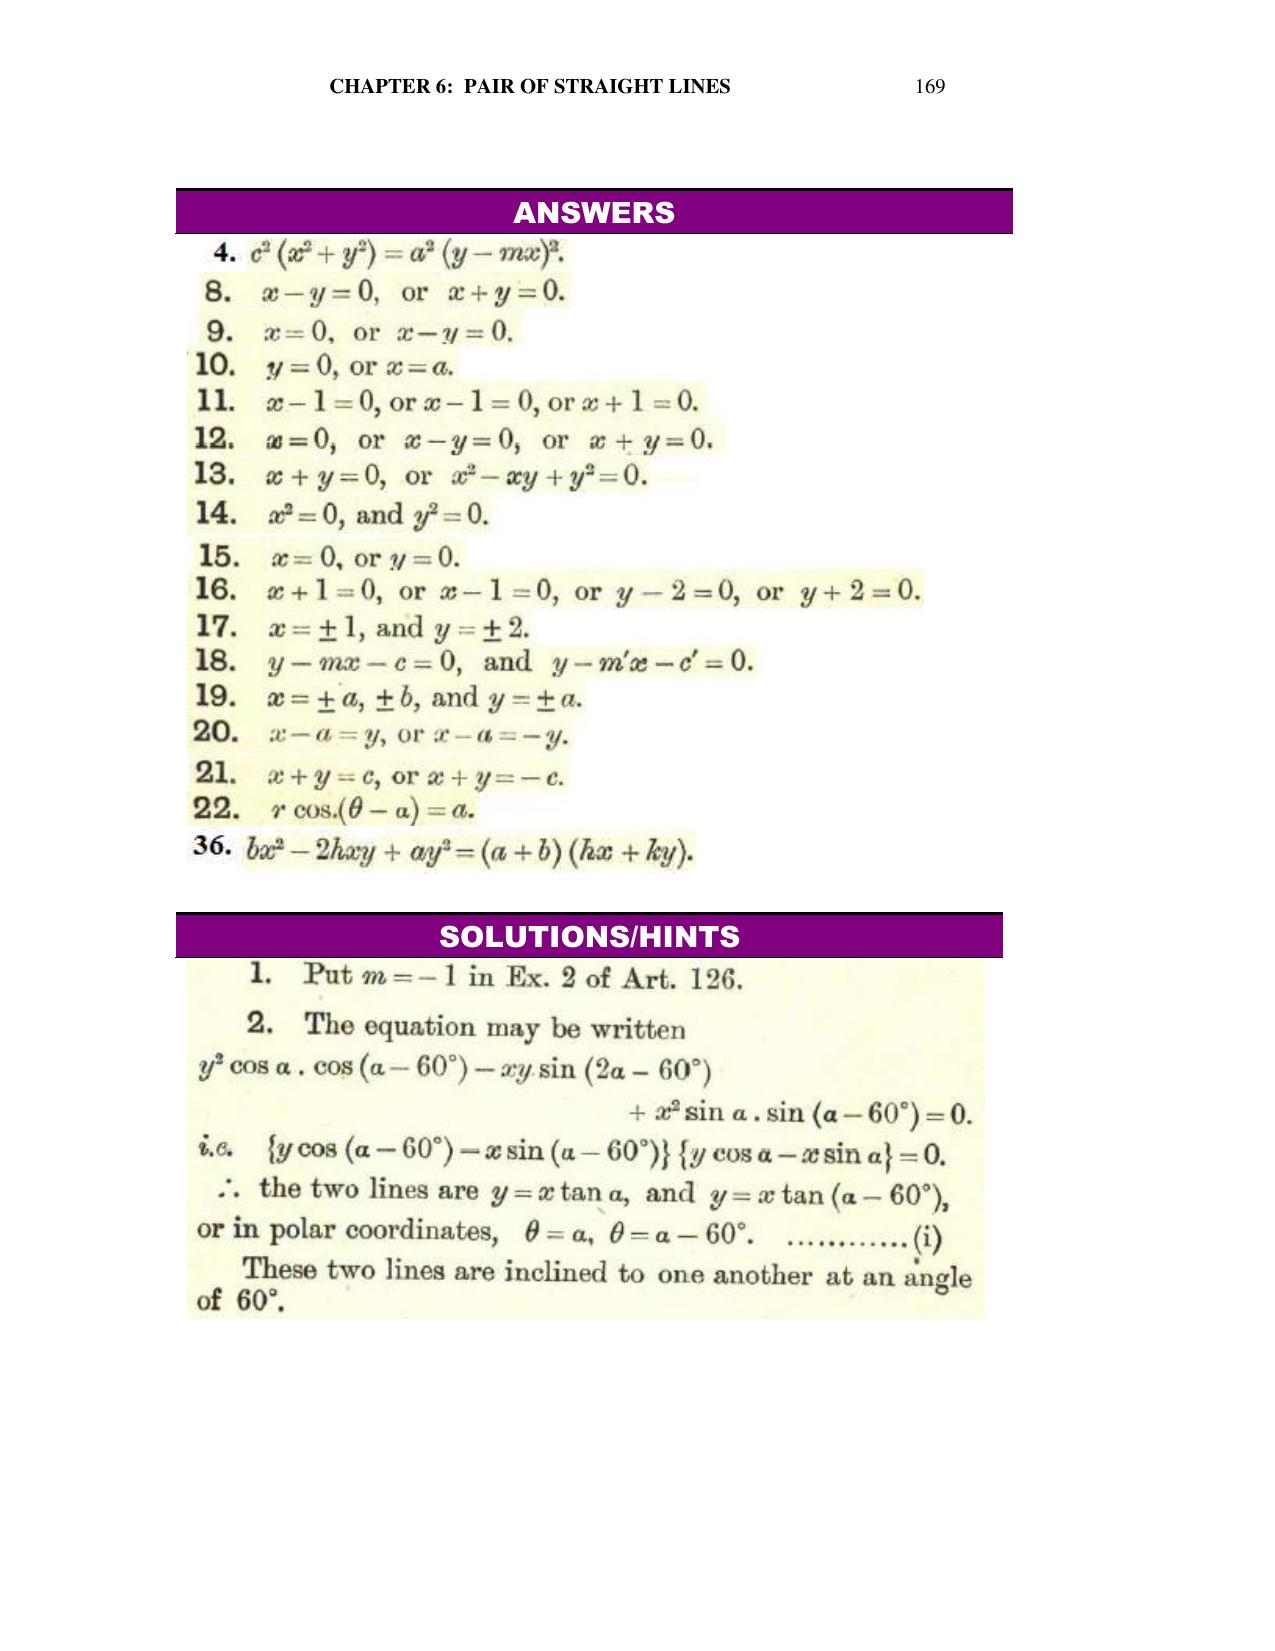 Chapter 6: On Equations Representing Two or More Straight Lines - SL Loney Solutions: The Elements of Coordinate Geometry - Page 30